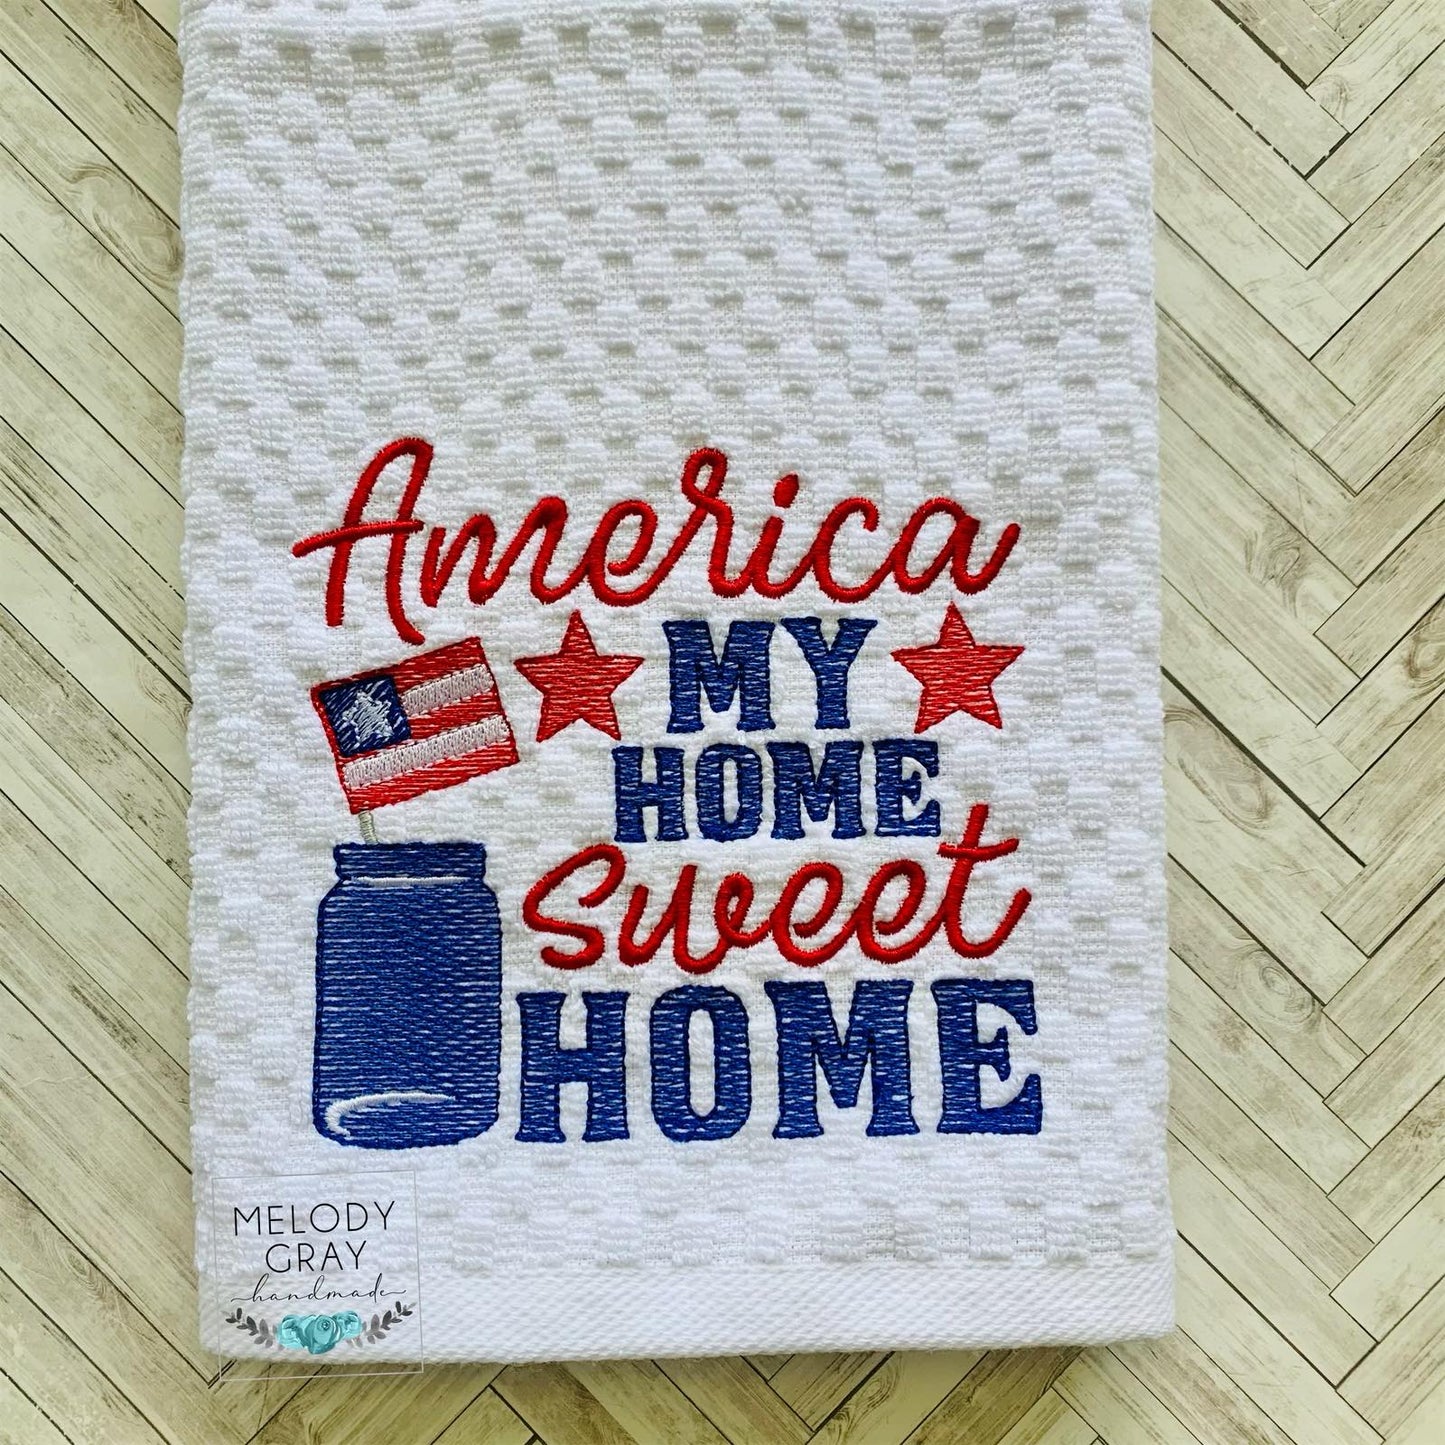 America Home Sweet Home - 4 sizes- Digital Embroidery Design